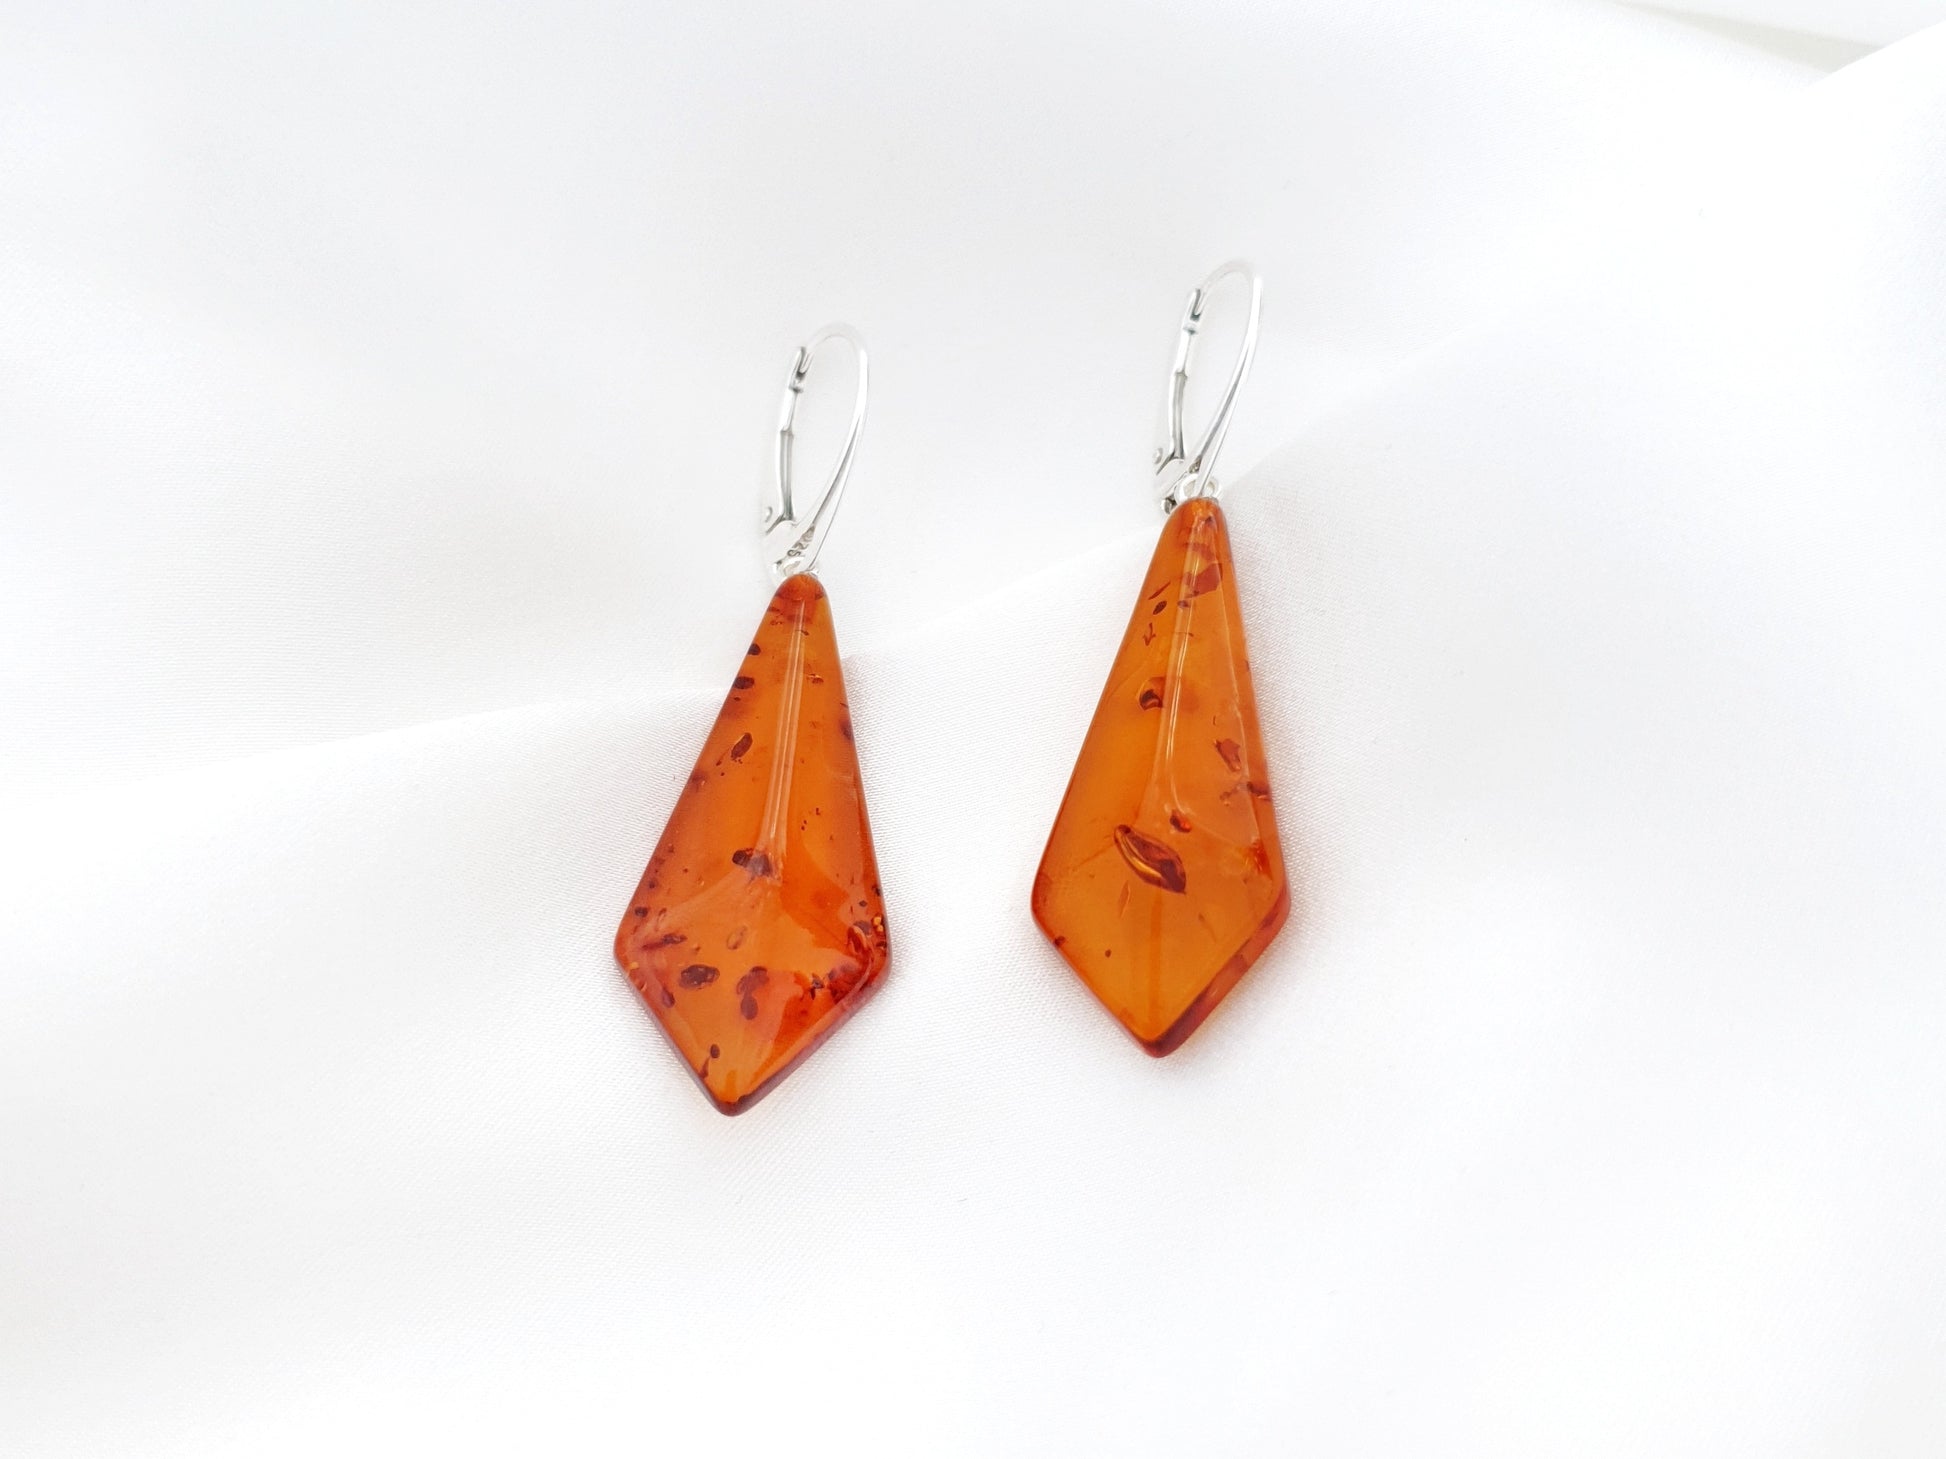 Silver earrings with amber stone